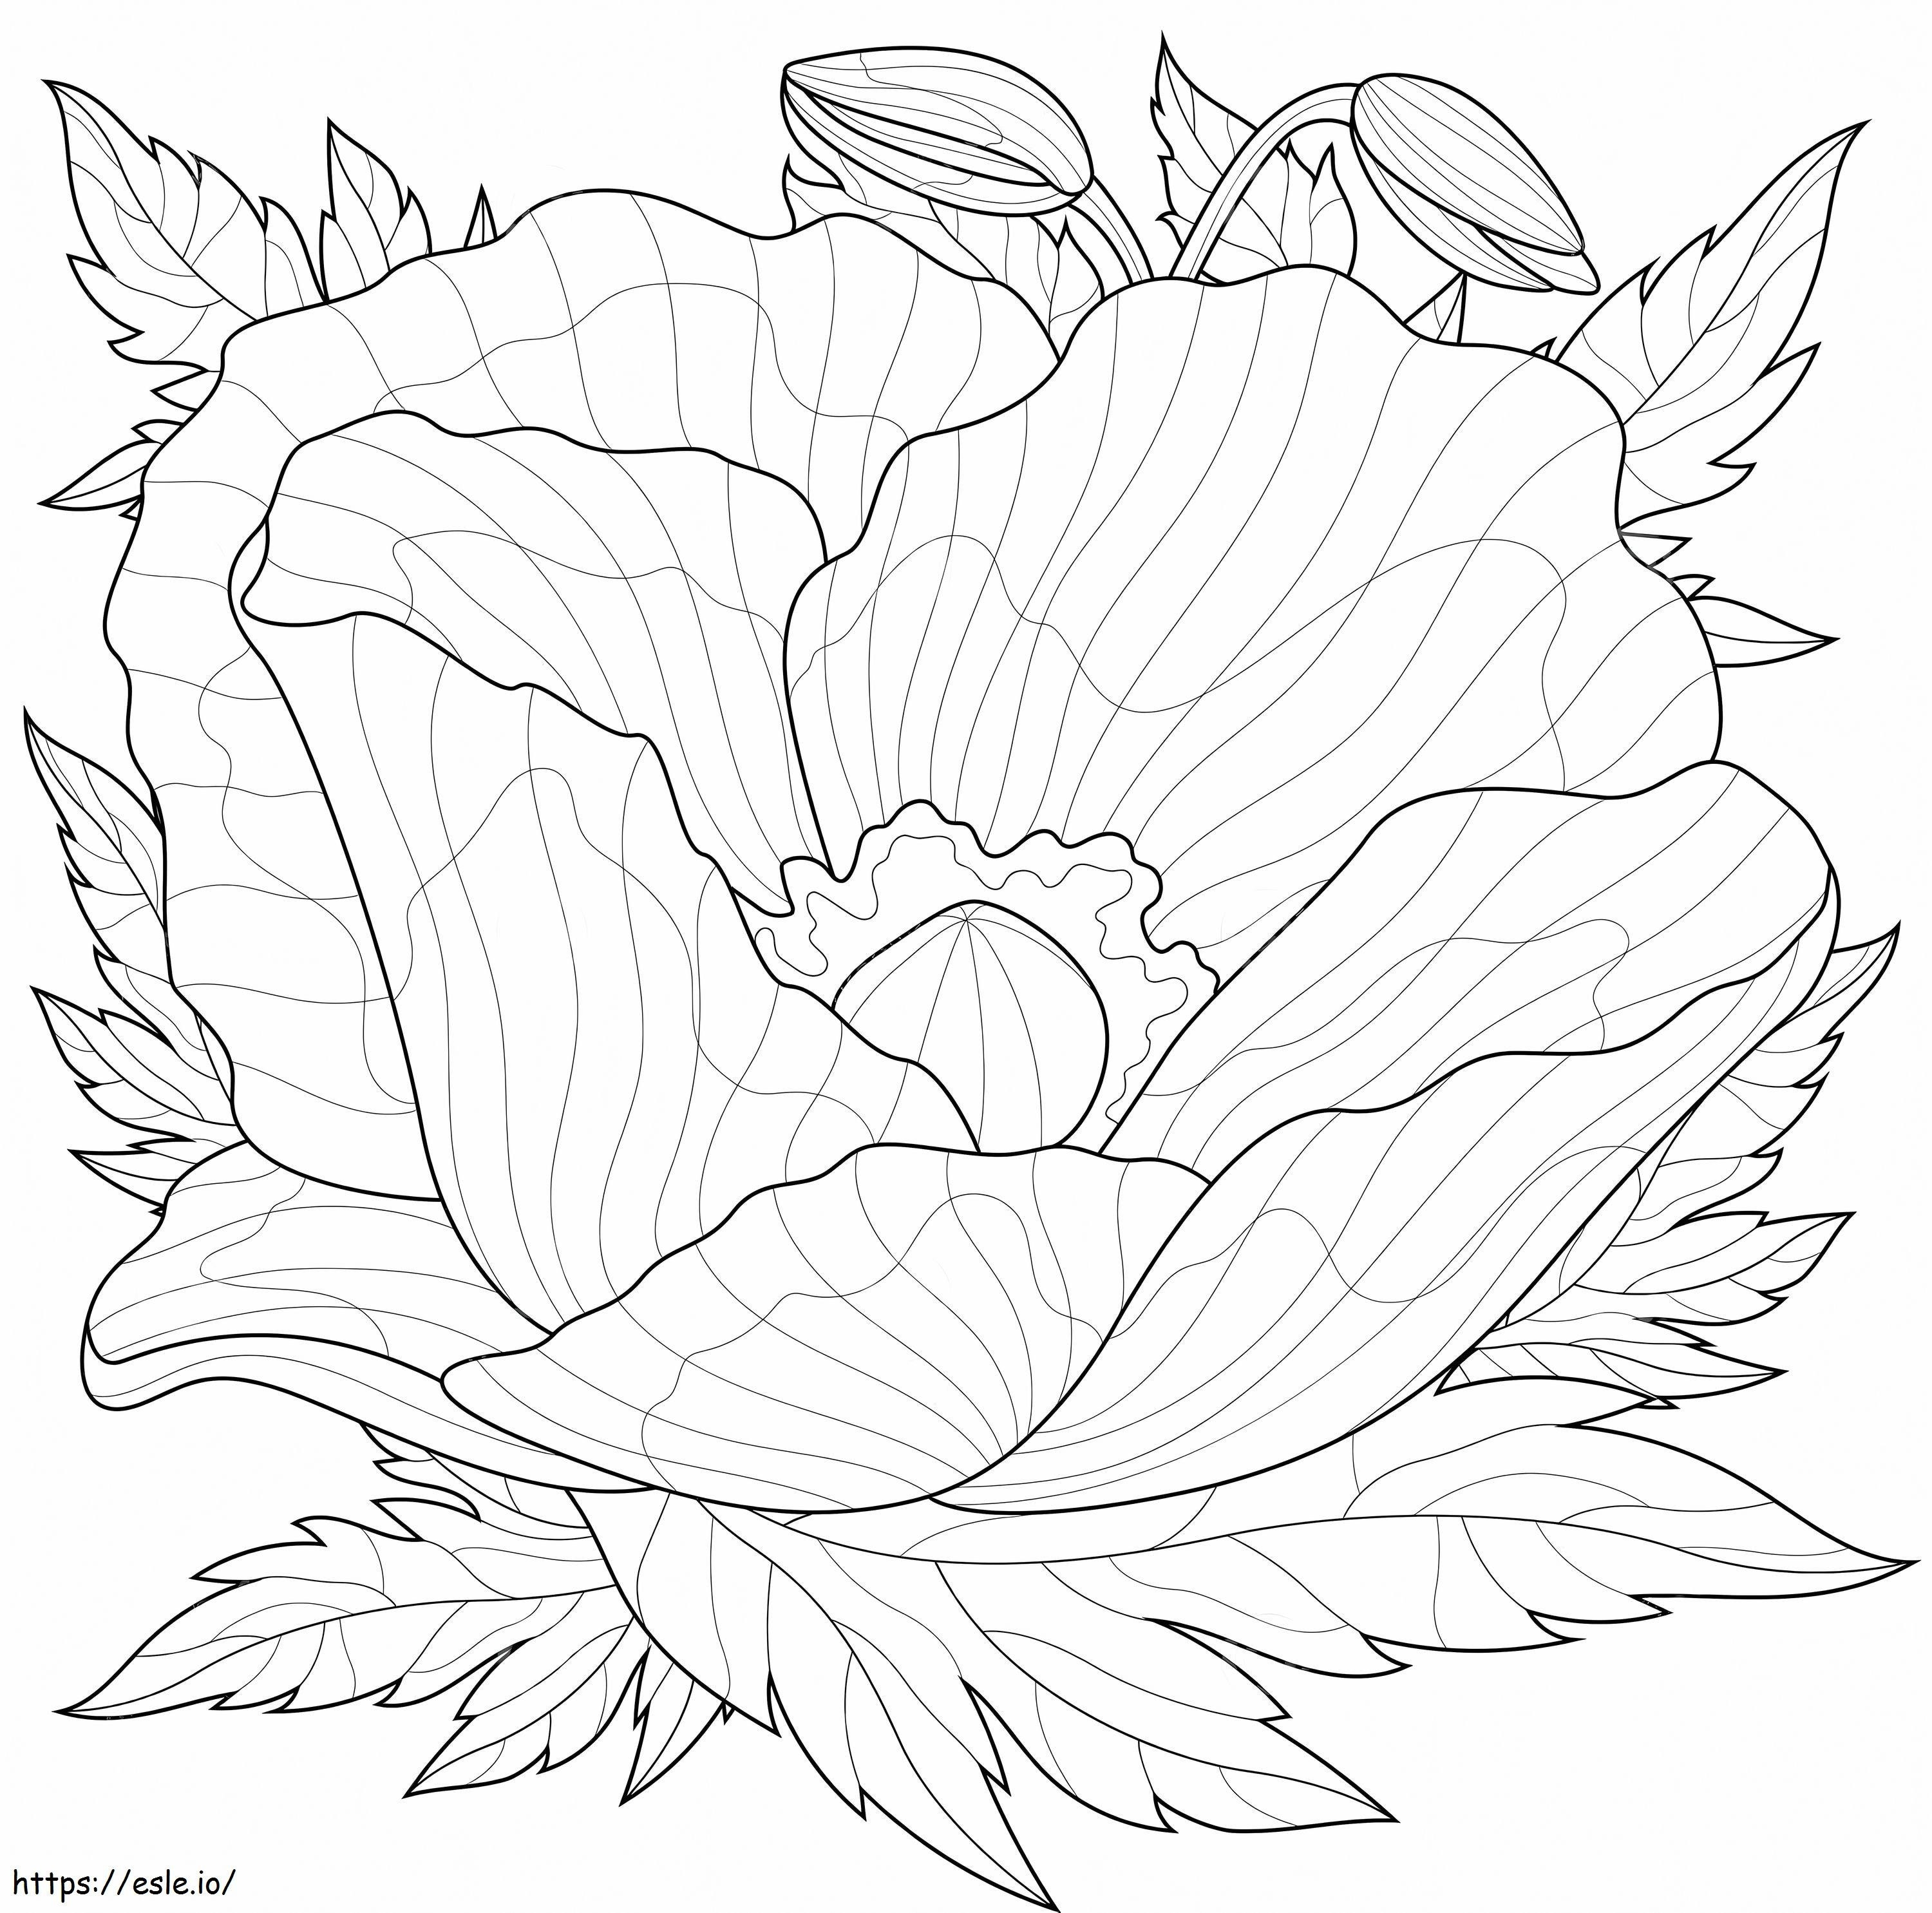 Poppy With Leaves Around coloring page